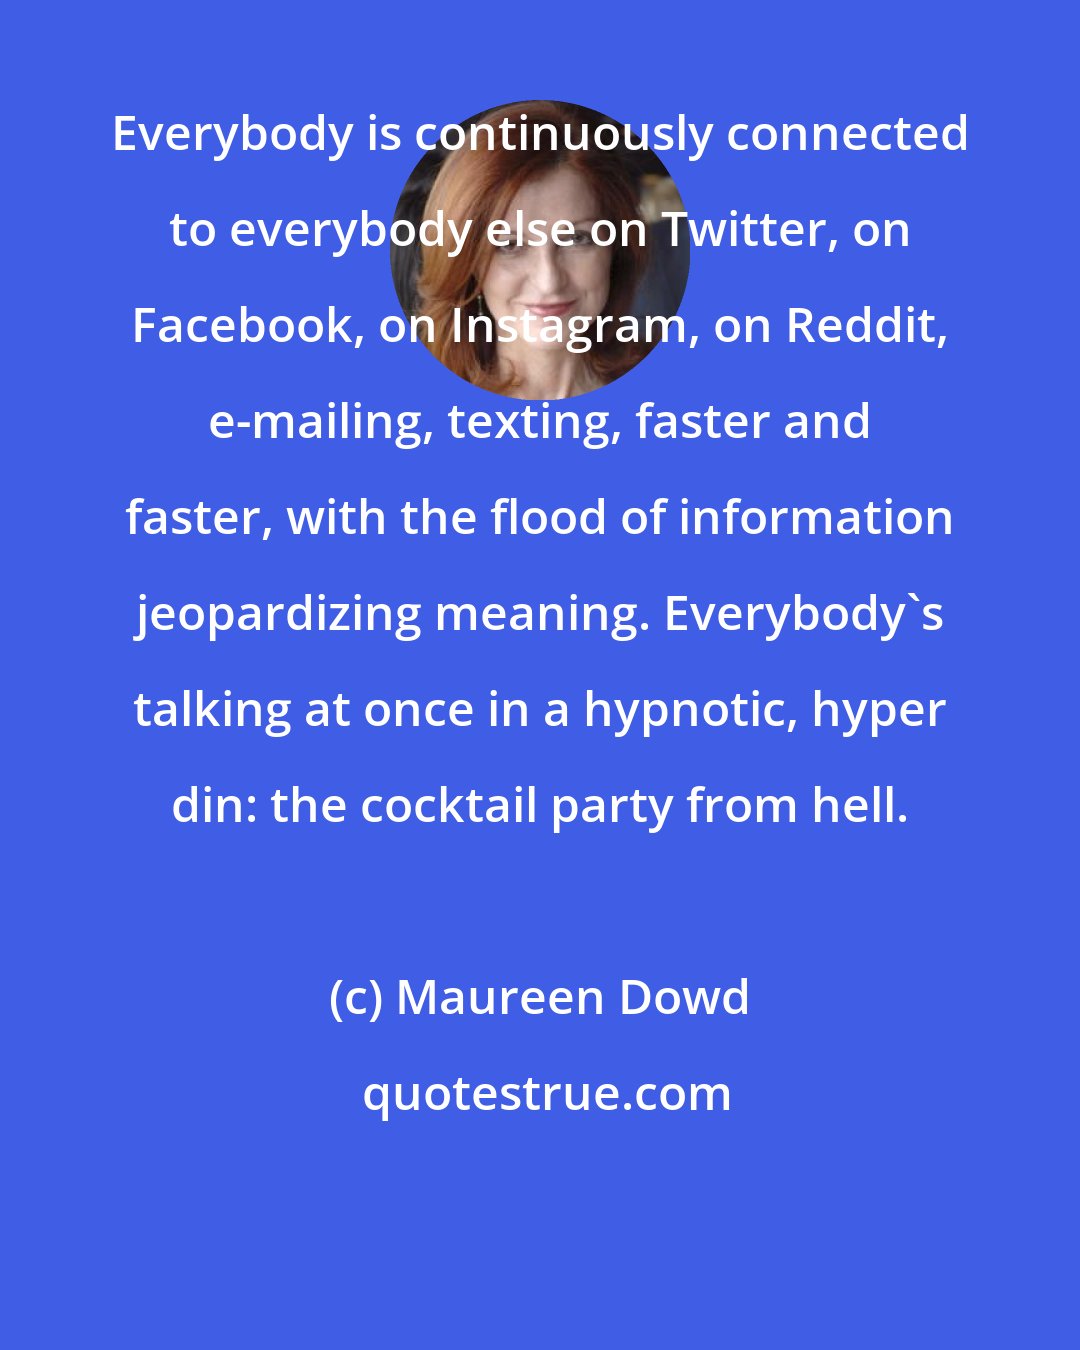 Maureen Dowd: Everybody is continuously connected to everybody else on Twitter, on Facebook, on Instagram, on Reddit, e-mailing, texting, faster and faster, with the flood of information jeopardizing meaning. Everybody's talking at once in a hypnotic, hyper din: the cocktail party from hell.